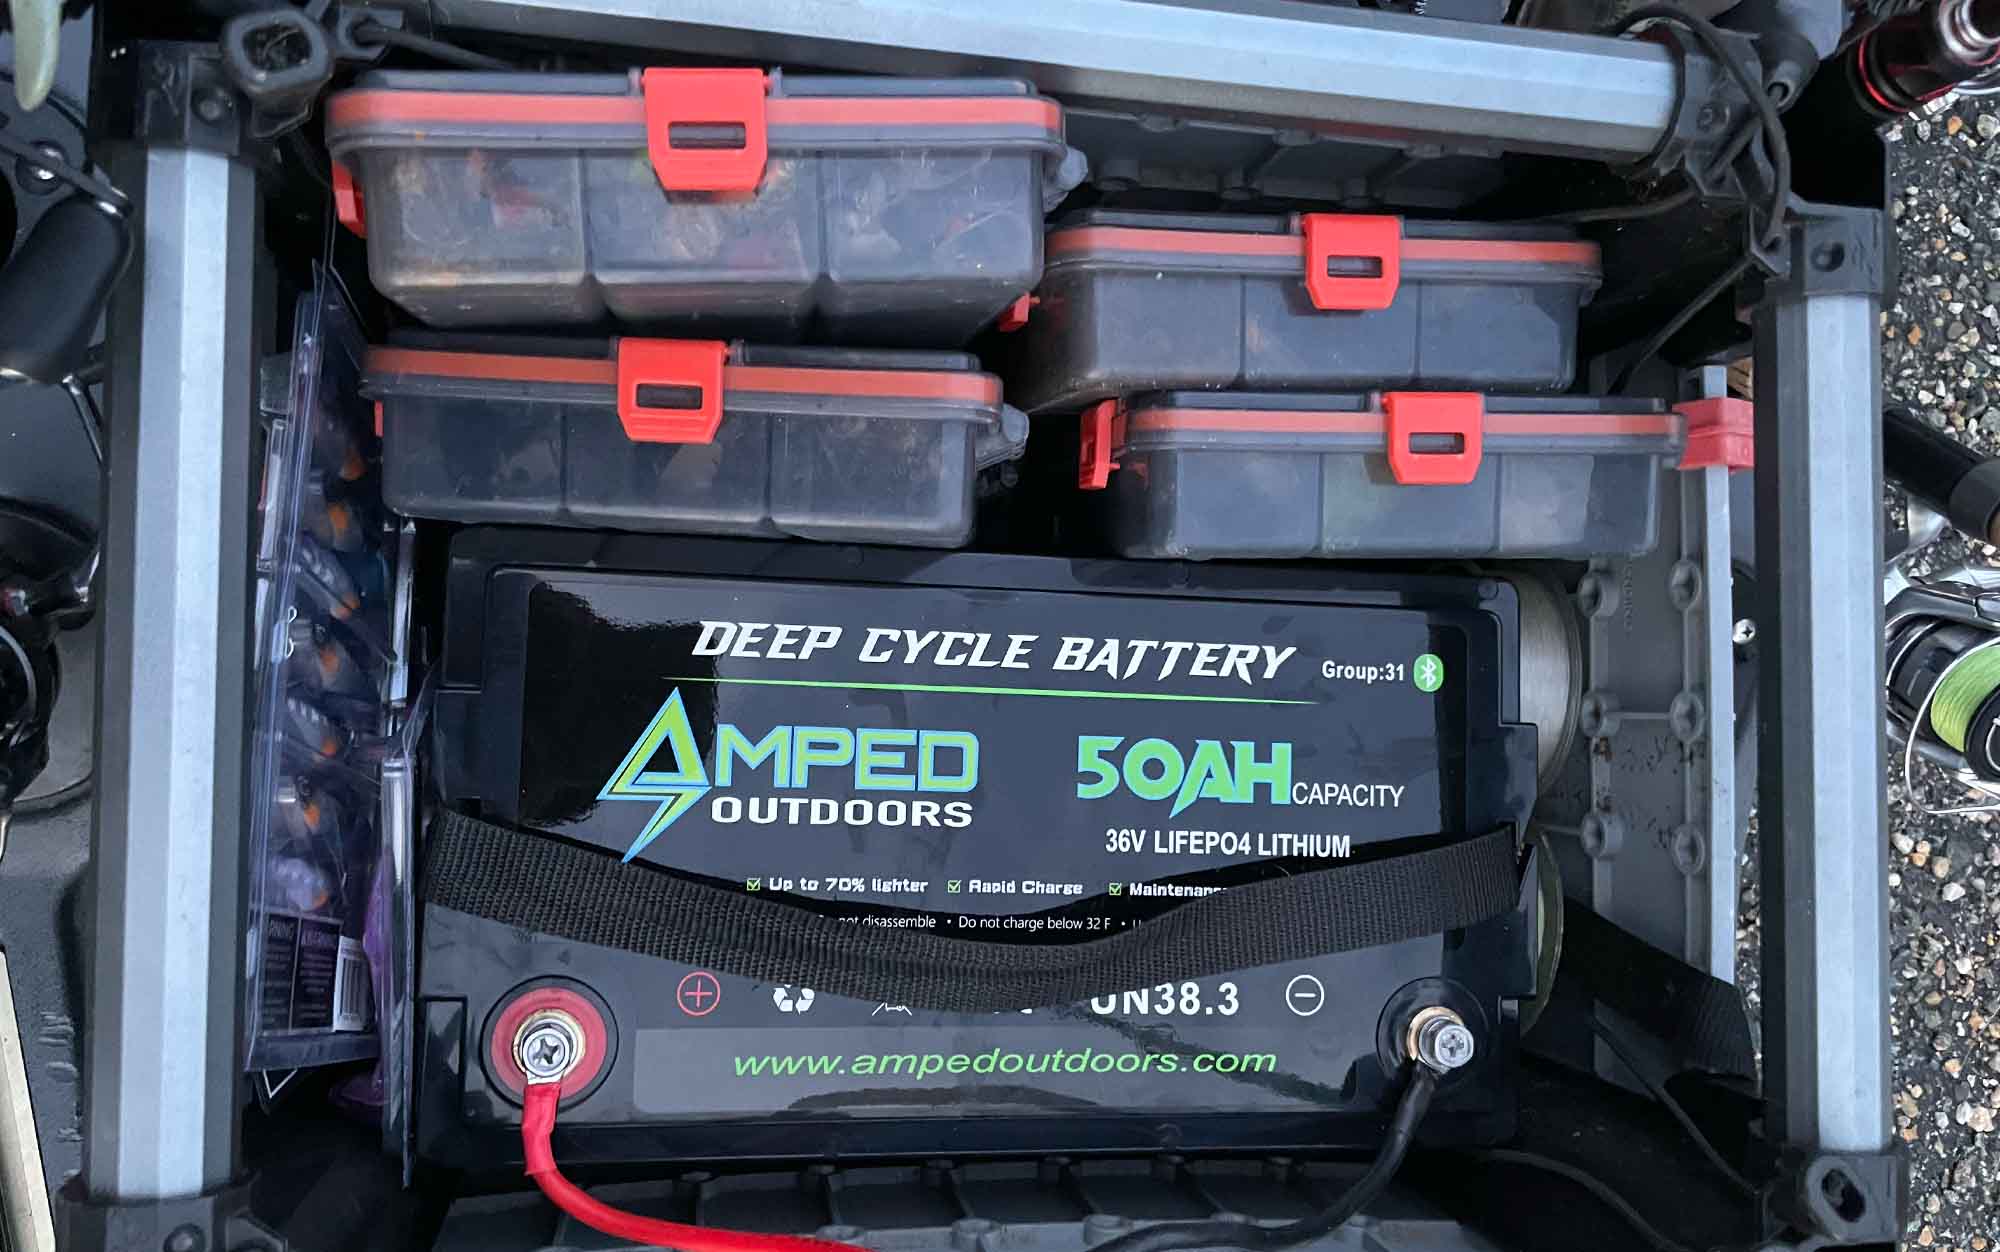 Author used the Amped Outdoors 50ah battery.